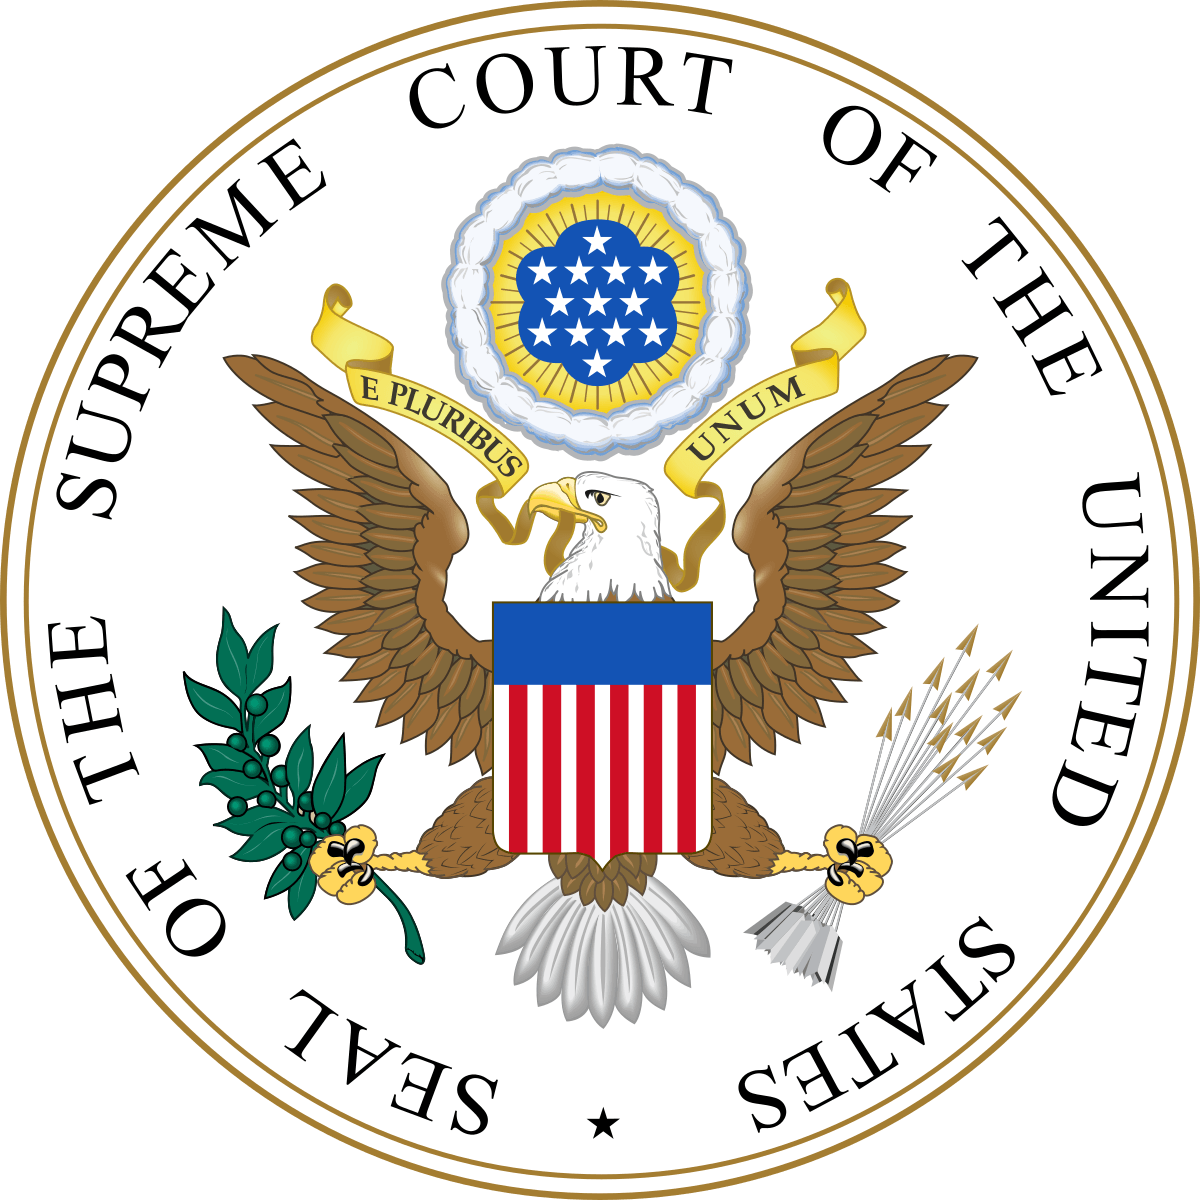 Supremem Court Justice Logo - List of Justices of the Supreme Court of the United States